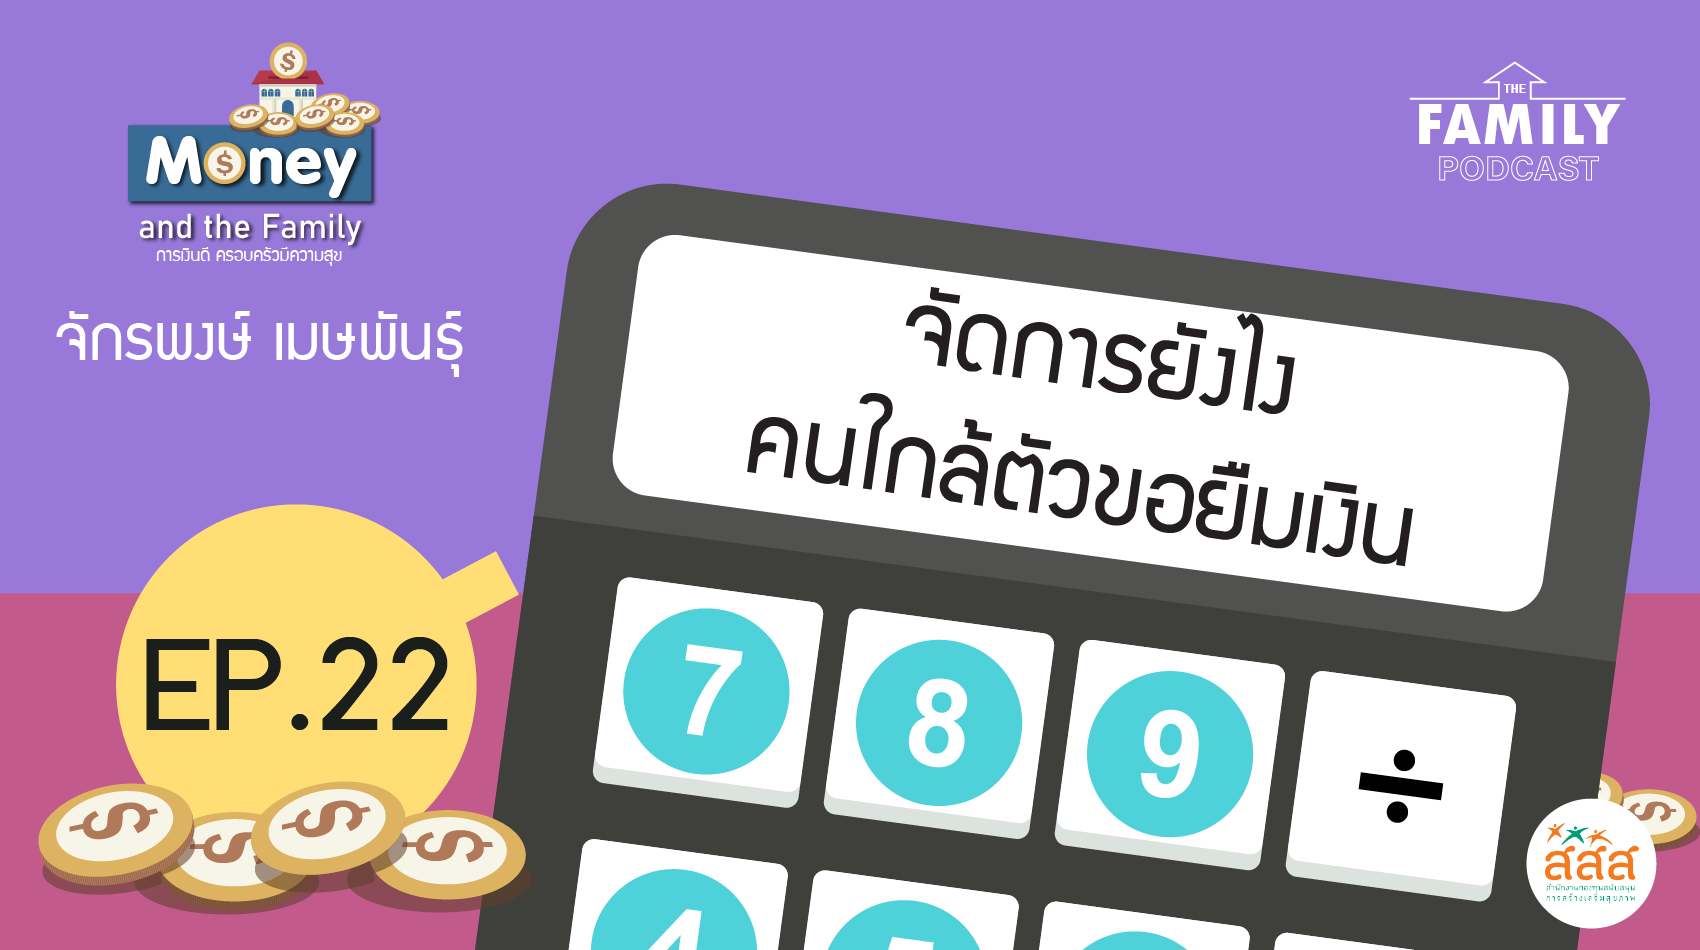 The Family Podcast Money and the Family EP. 22 จัดการยังไง คนใกล้ตัวขอยืมเงิน